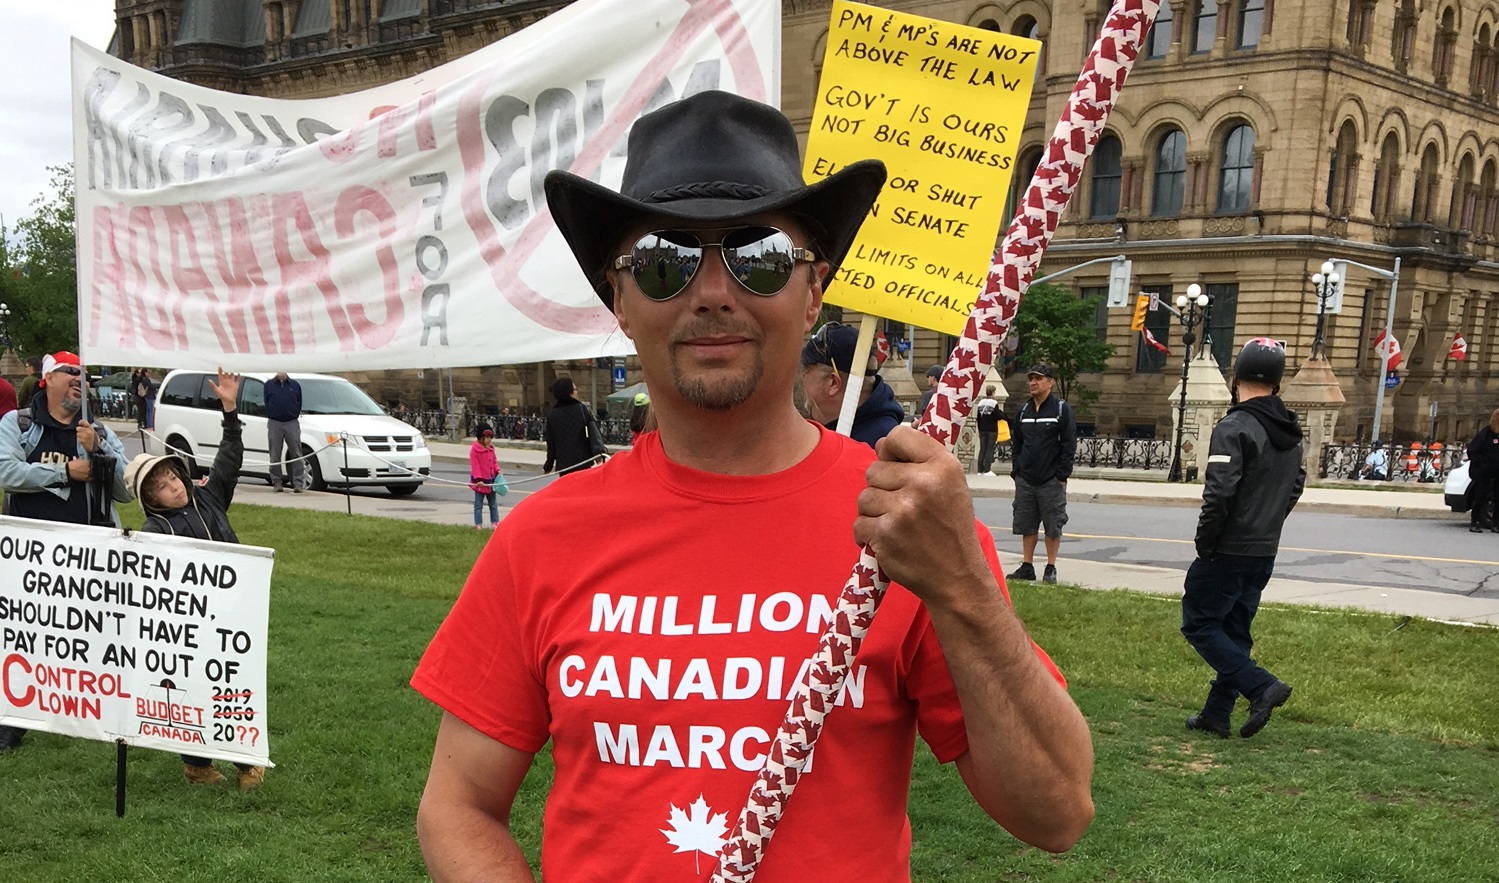 Million Canadian Deplorables March organizer Mike Waine stands in front of Canada's Parliament Hill. Daily Caller photo